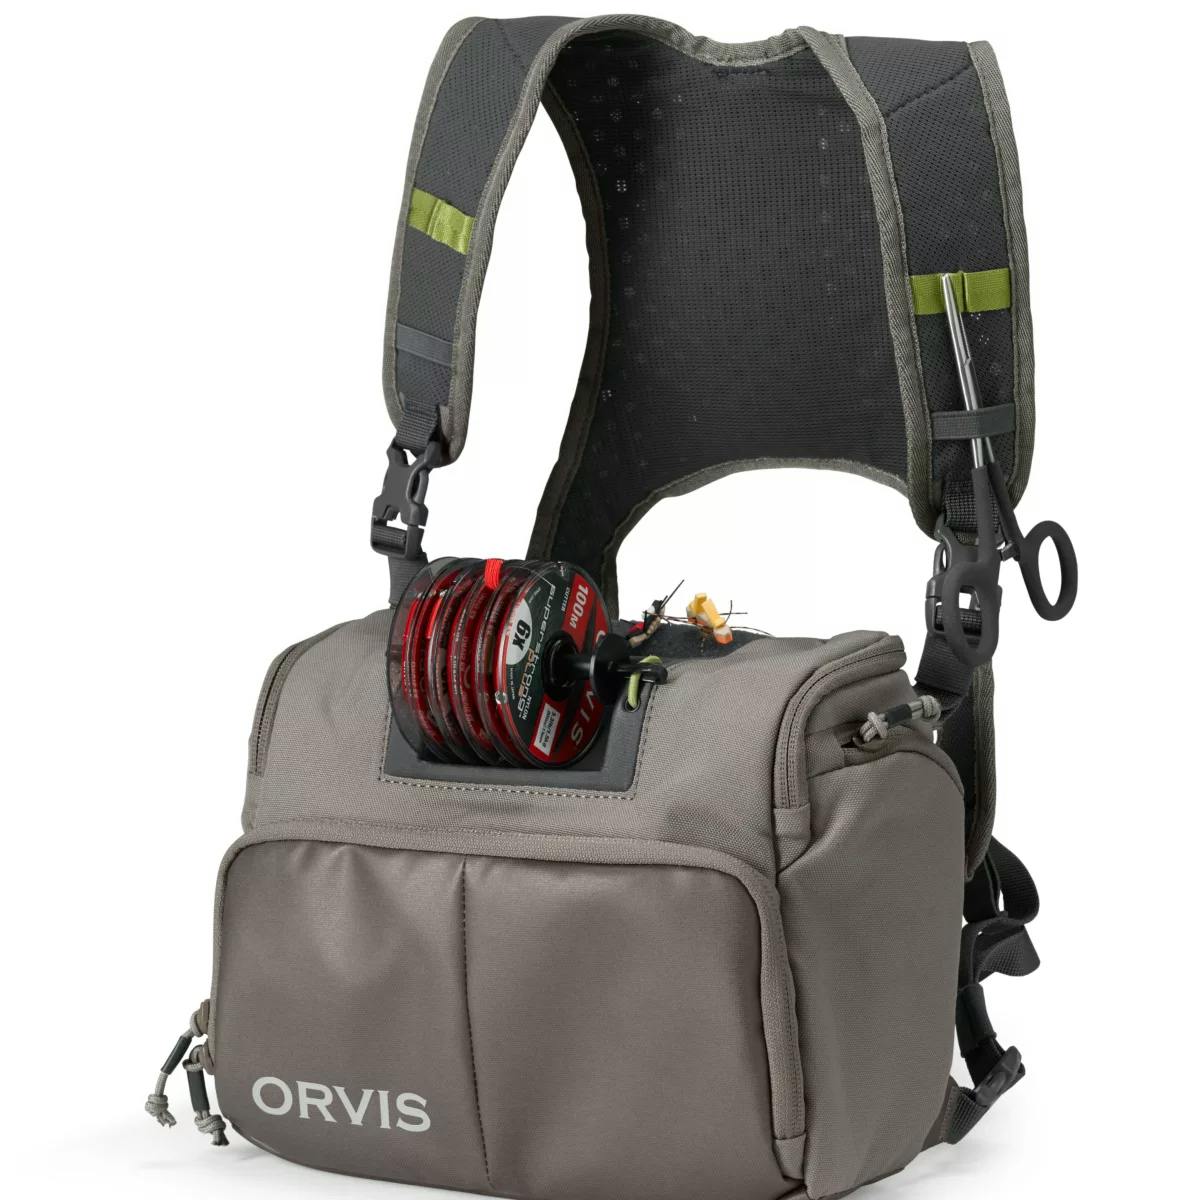 Product image of an Orvis chest pack.